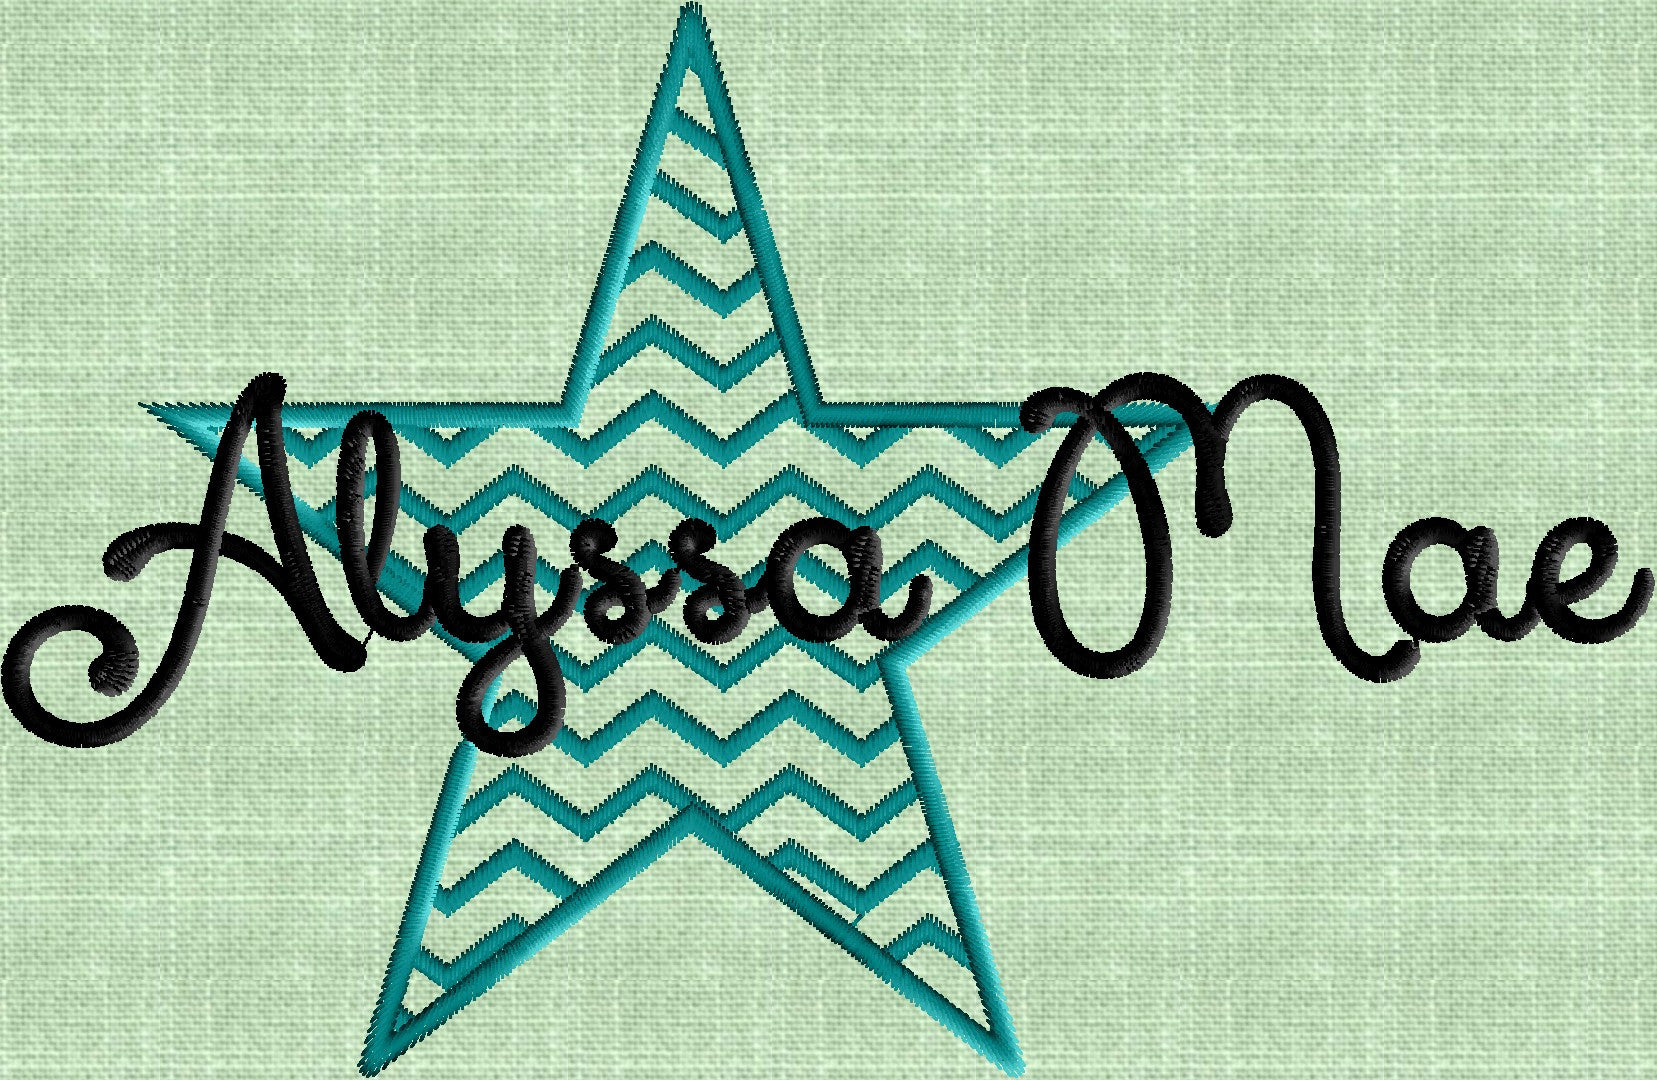 Chevron Star Frame Accent - Embroidery Design Embroidery DESIGN FILE - Instant download - Hus Dst Jef Pes Exp Vp3 formats - 2 sizes 1 color